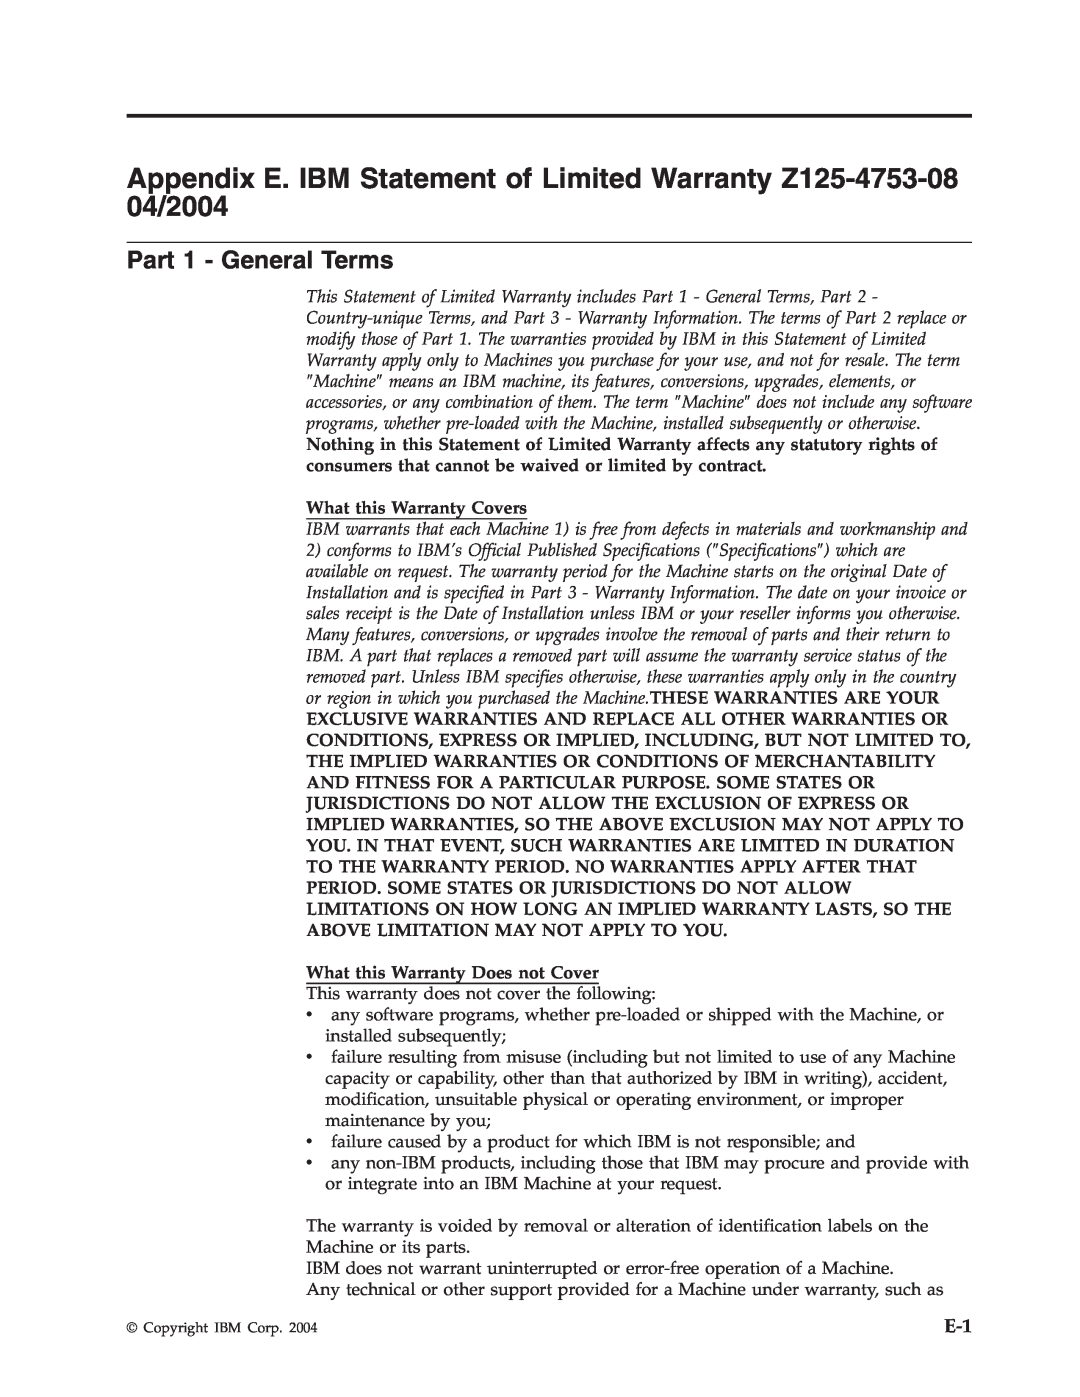 IBM PROJECTOR C400 manual Appendix E. IBM Statement of Limited Warranty Z125-4753-08 04/2004, Part 1 - General Terms 